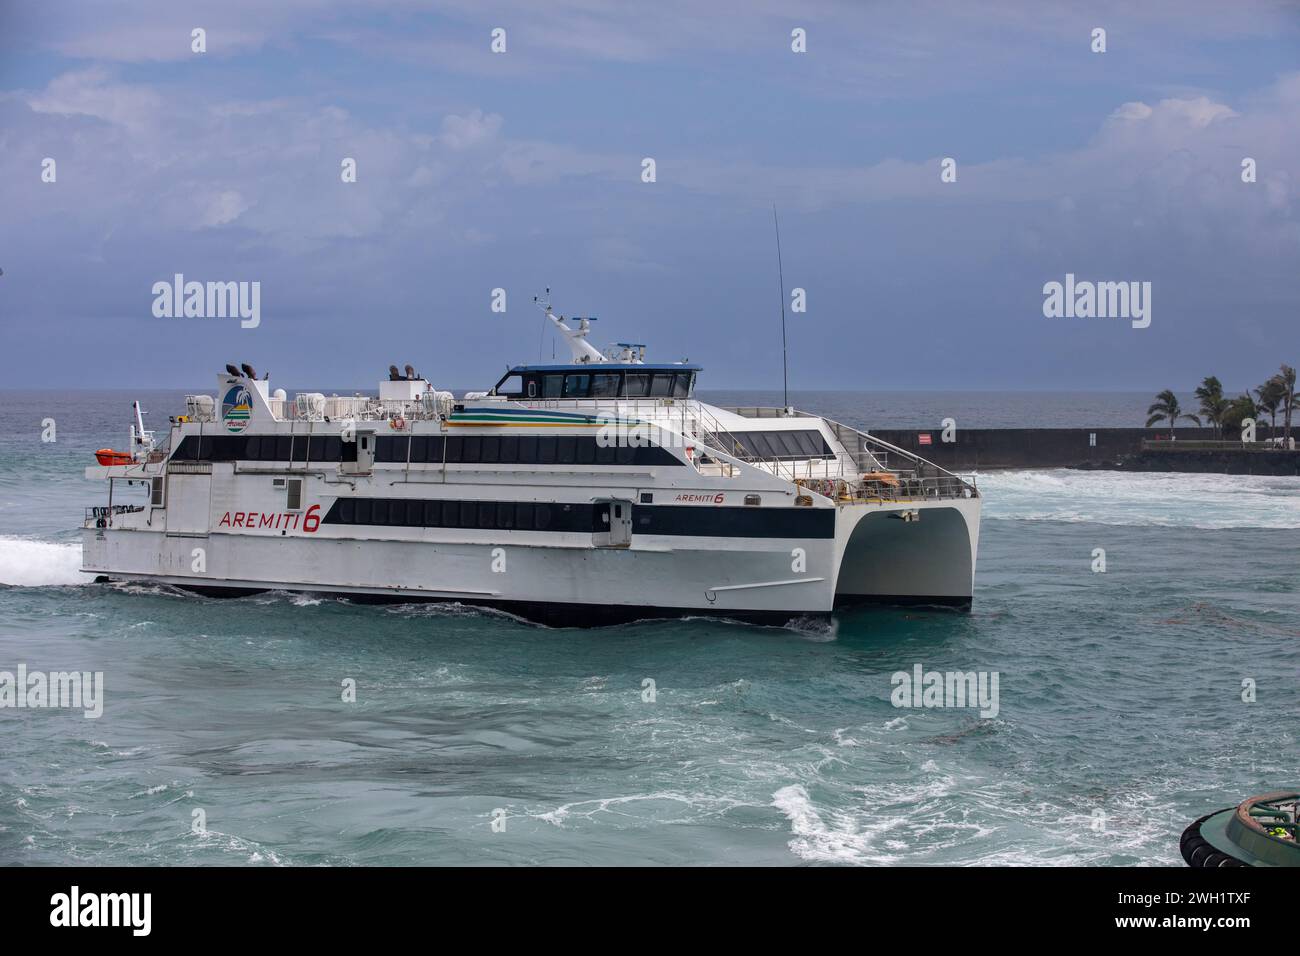 Aremiti 6 which operates in French Polynesia entering Papeete, Tahiti, South Pacific Ocean Stock Photo